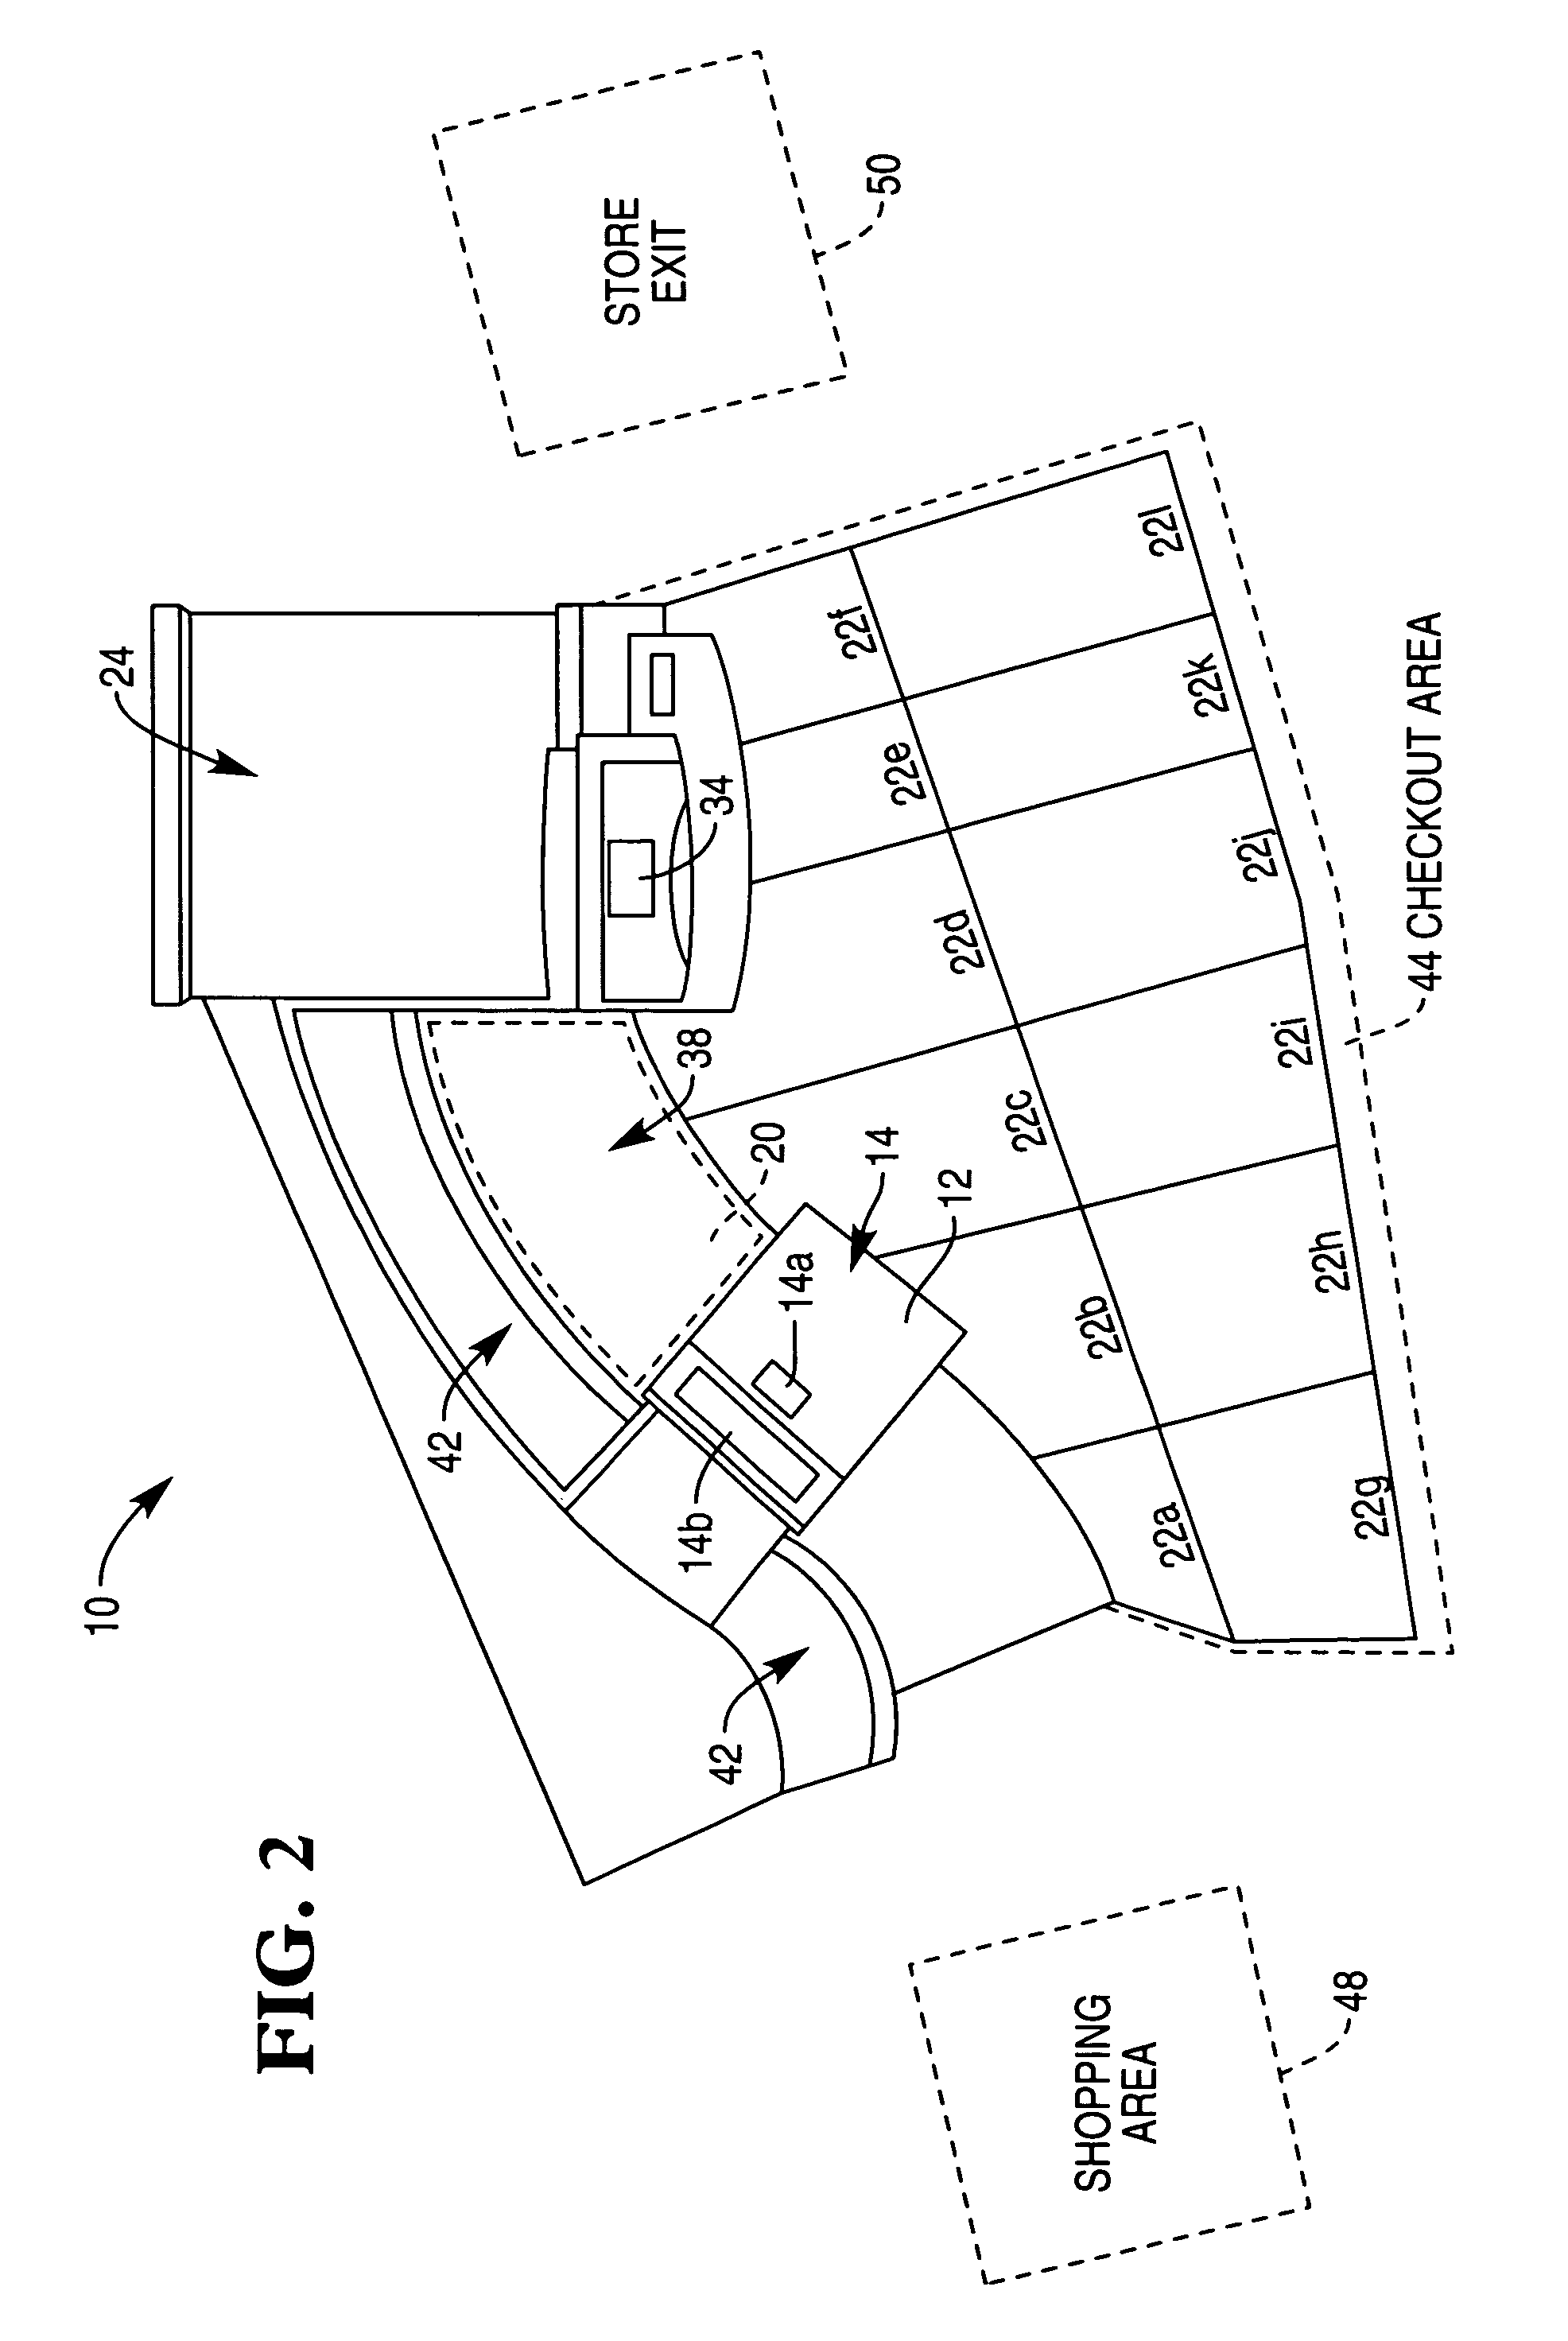 Method and apparatus for determining if a user walks away from a self-service checkout terminal during operation thereof